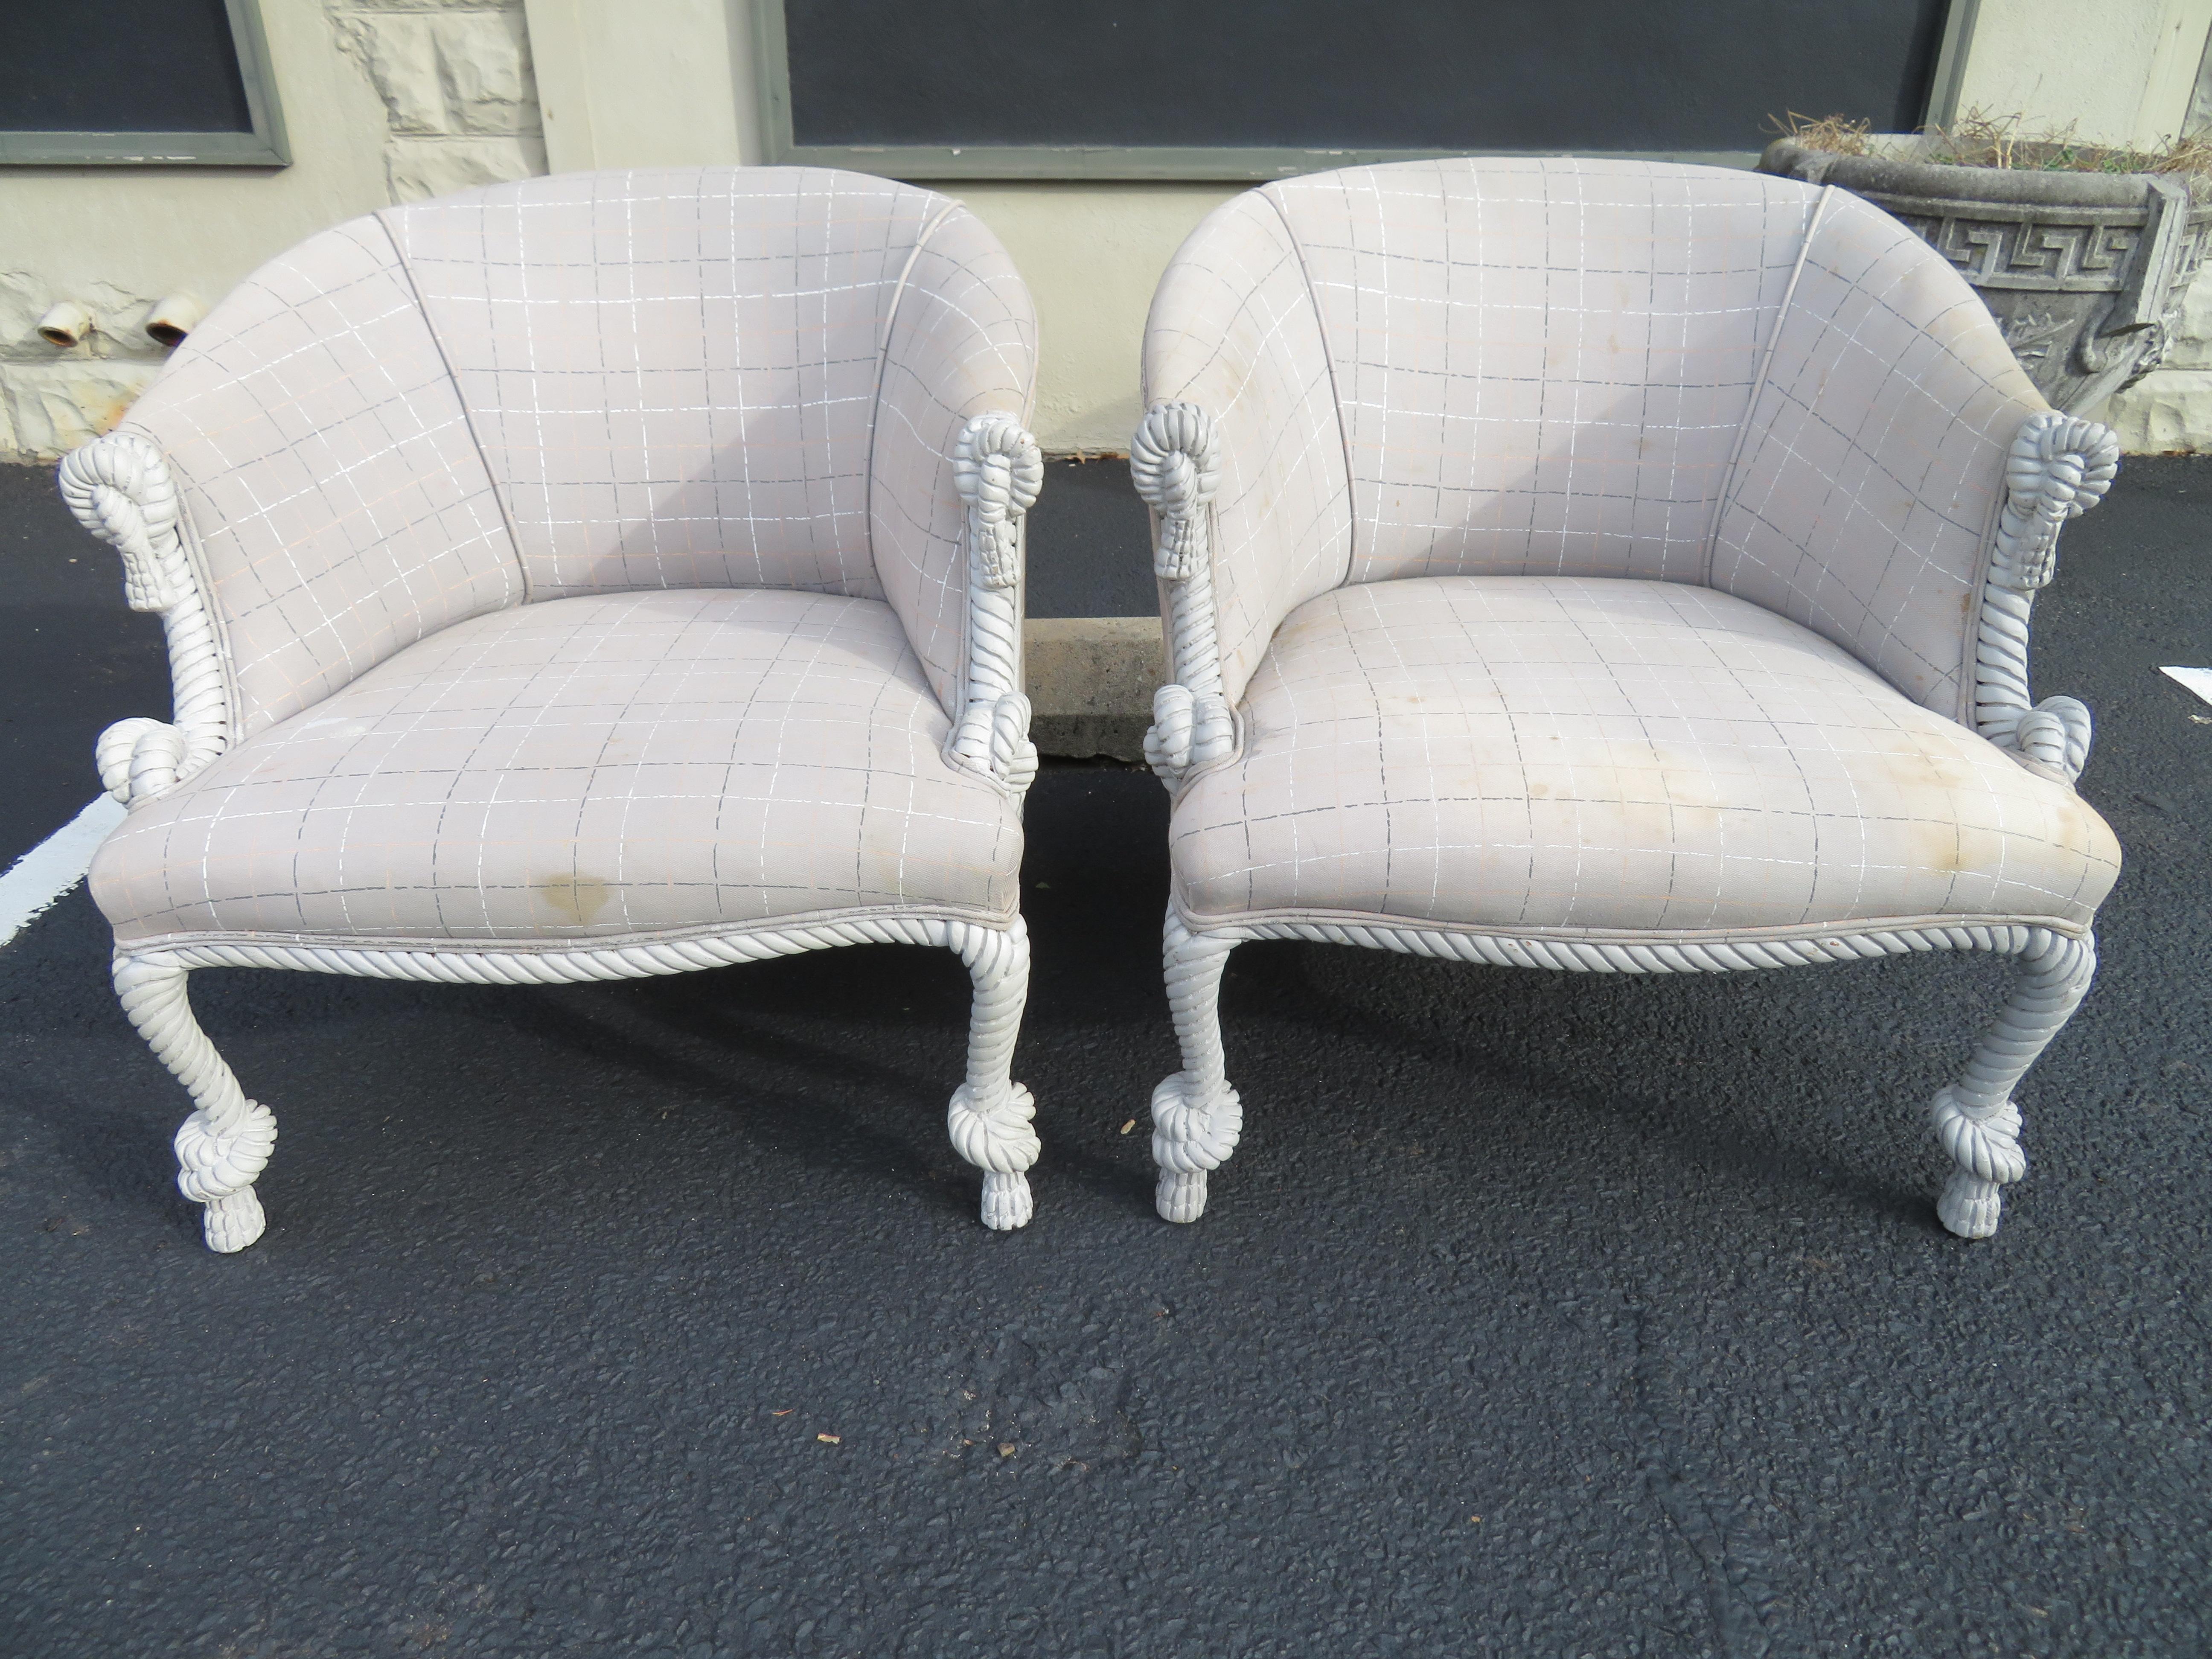 Lovely pair of 1950s Italian rope and tassel chairs. This pair will need reupholstering.